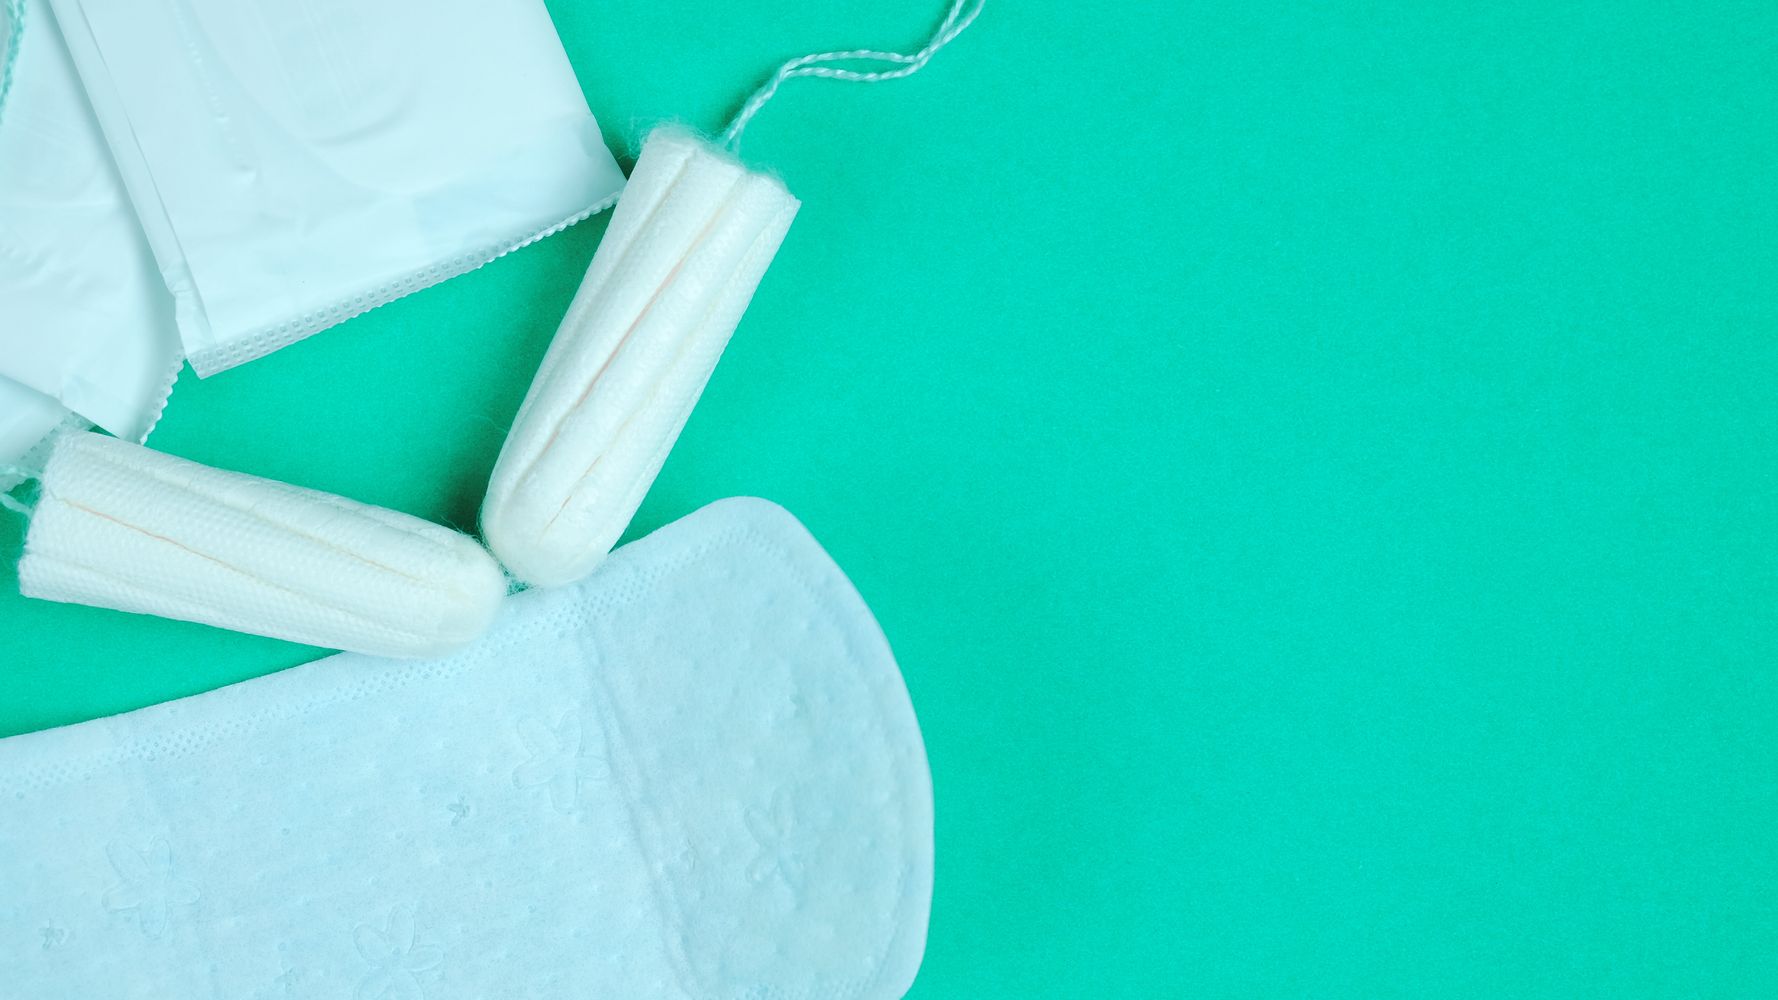 Myths about periods and tampoons